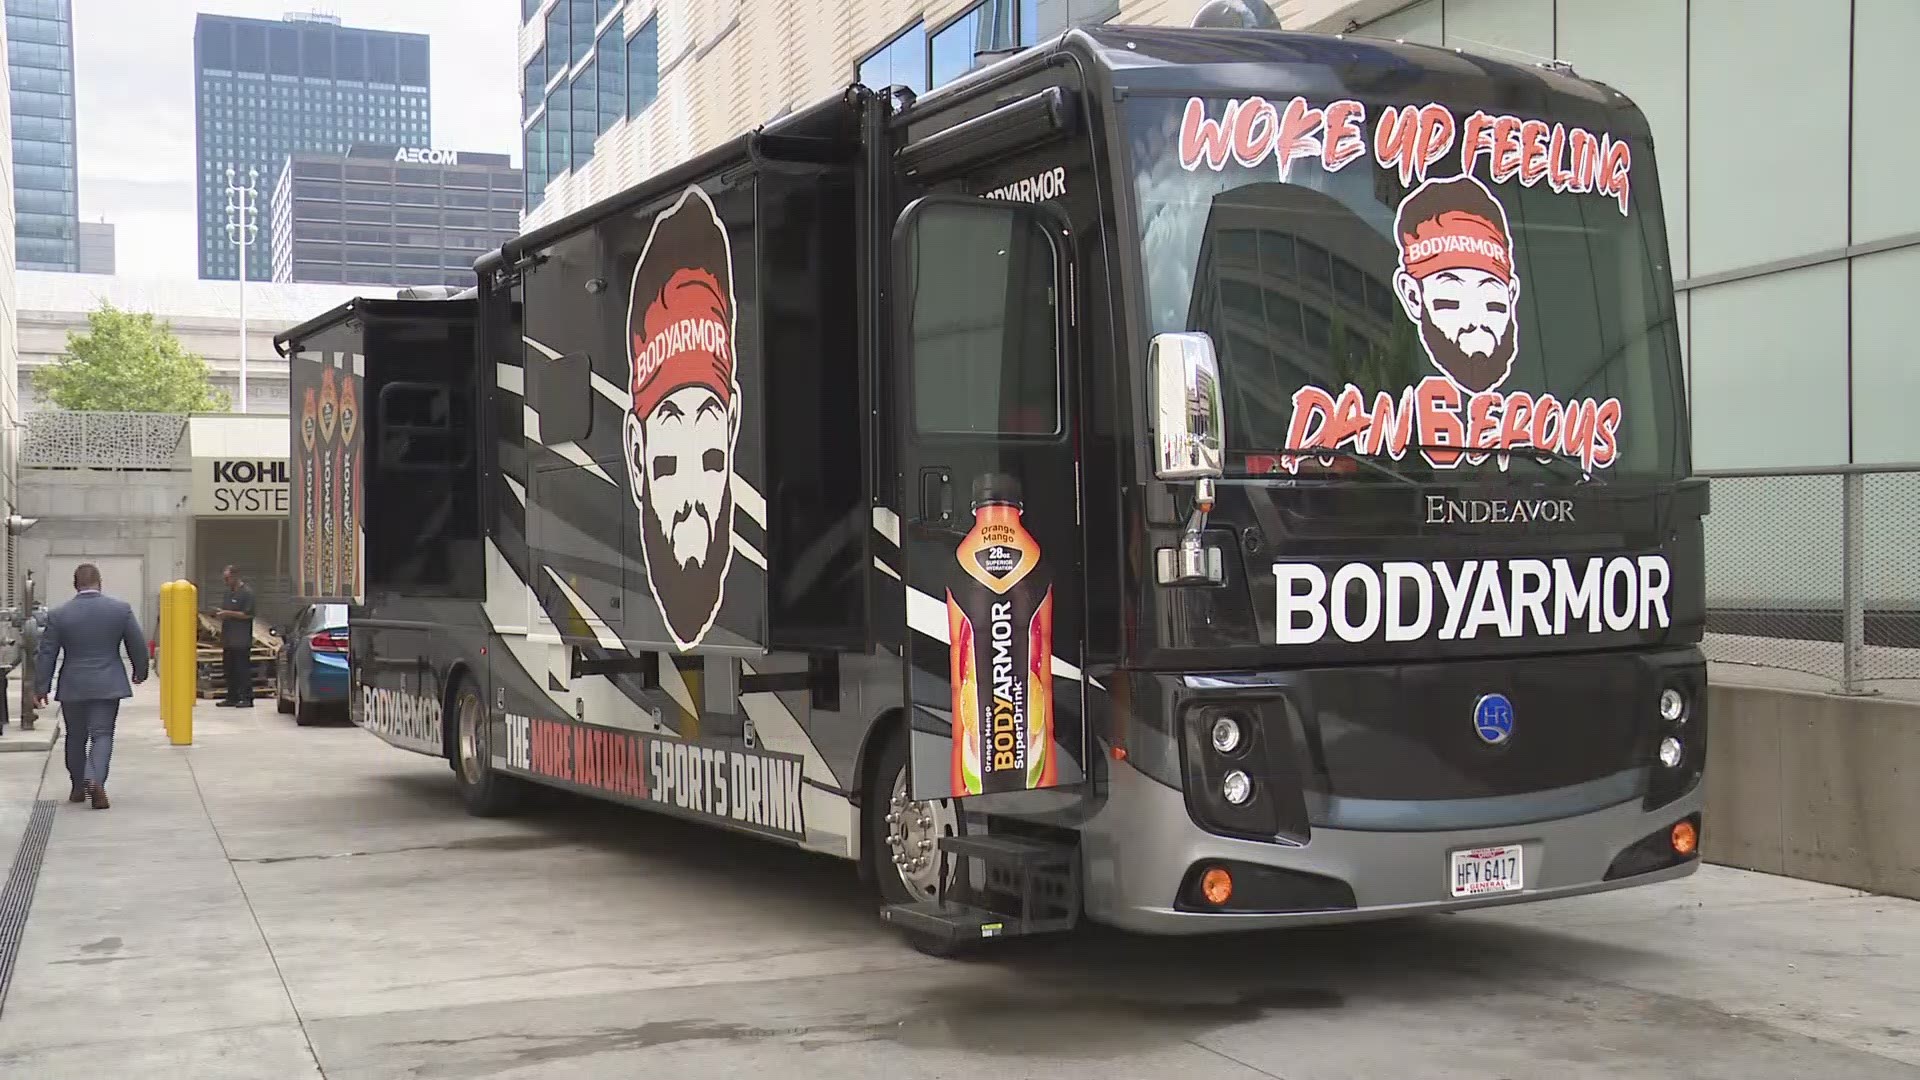 See inside quarterback Baker Mayfield's new and improved RV at Cleveland Browns training camp. Mayfield sat down with WKYC's Jim Donovan inside the RV to discuss his new business partnership and the upcoming season.